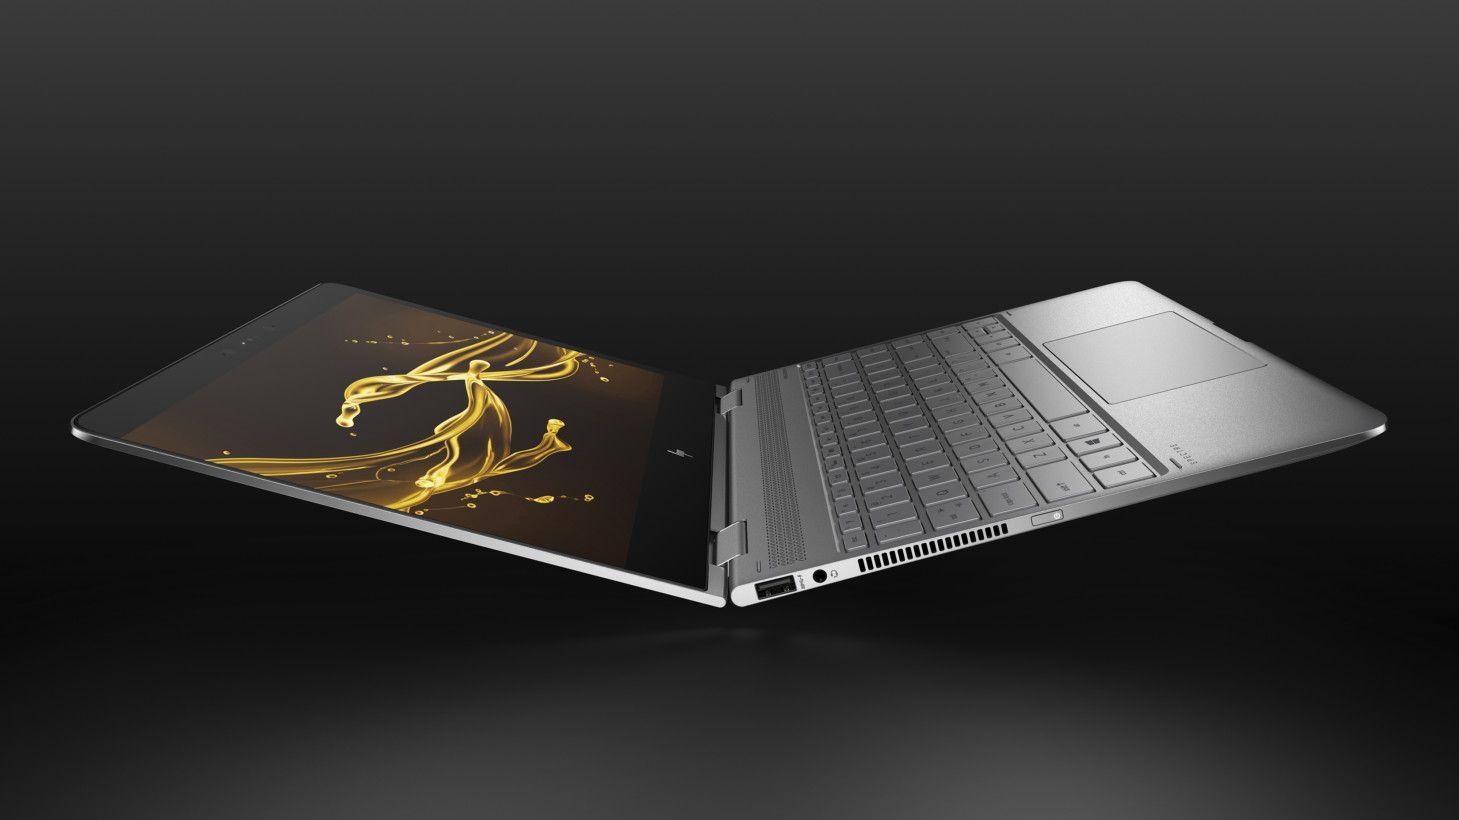 HP Spectre Logo - HP brings sleek new design language to refreshed Spectre x360